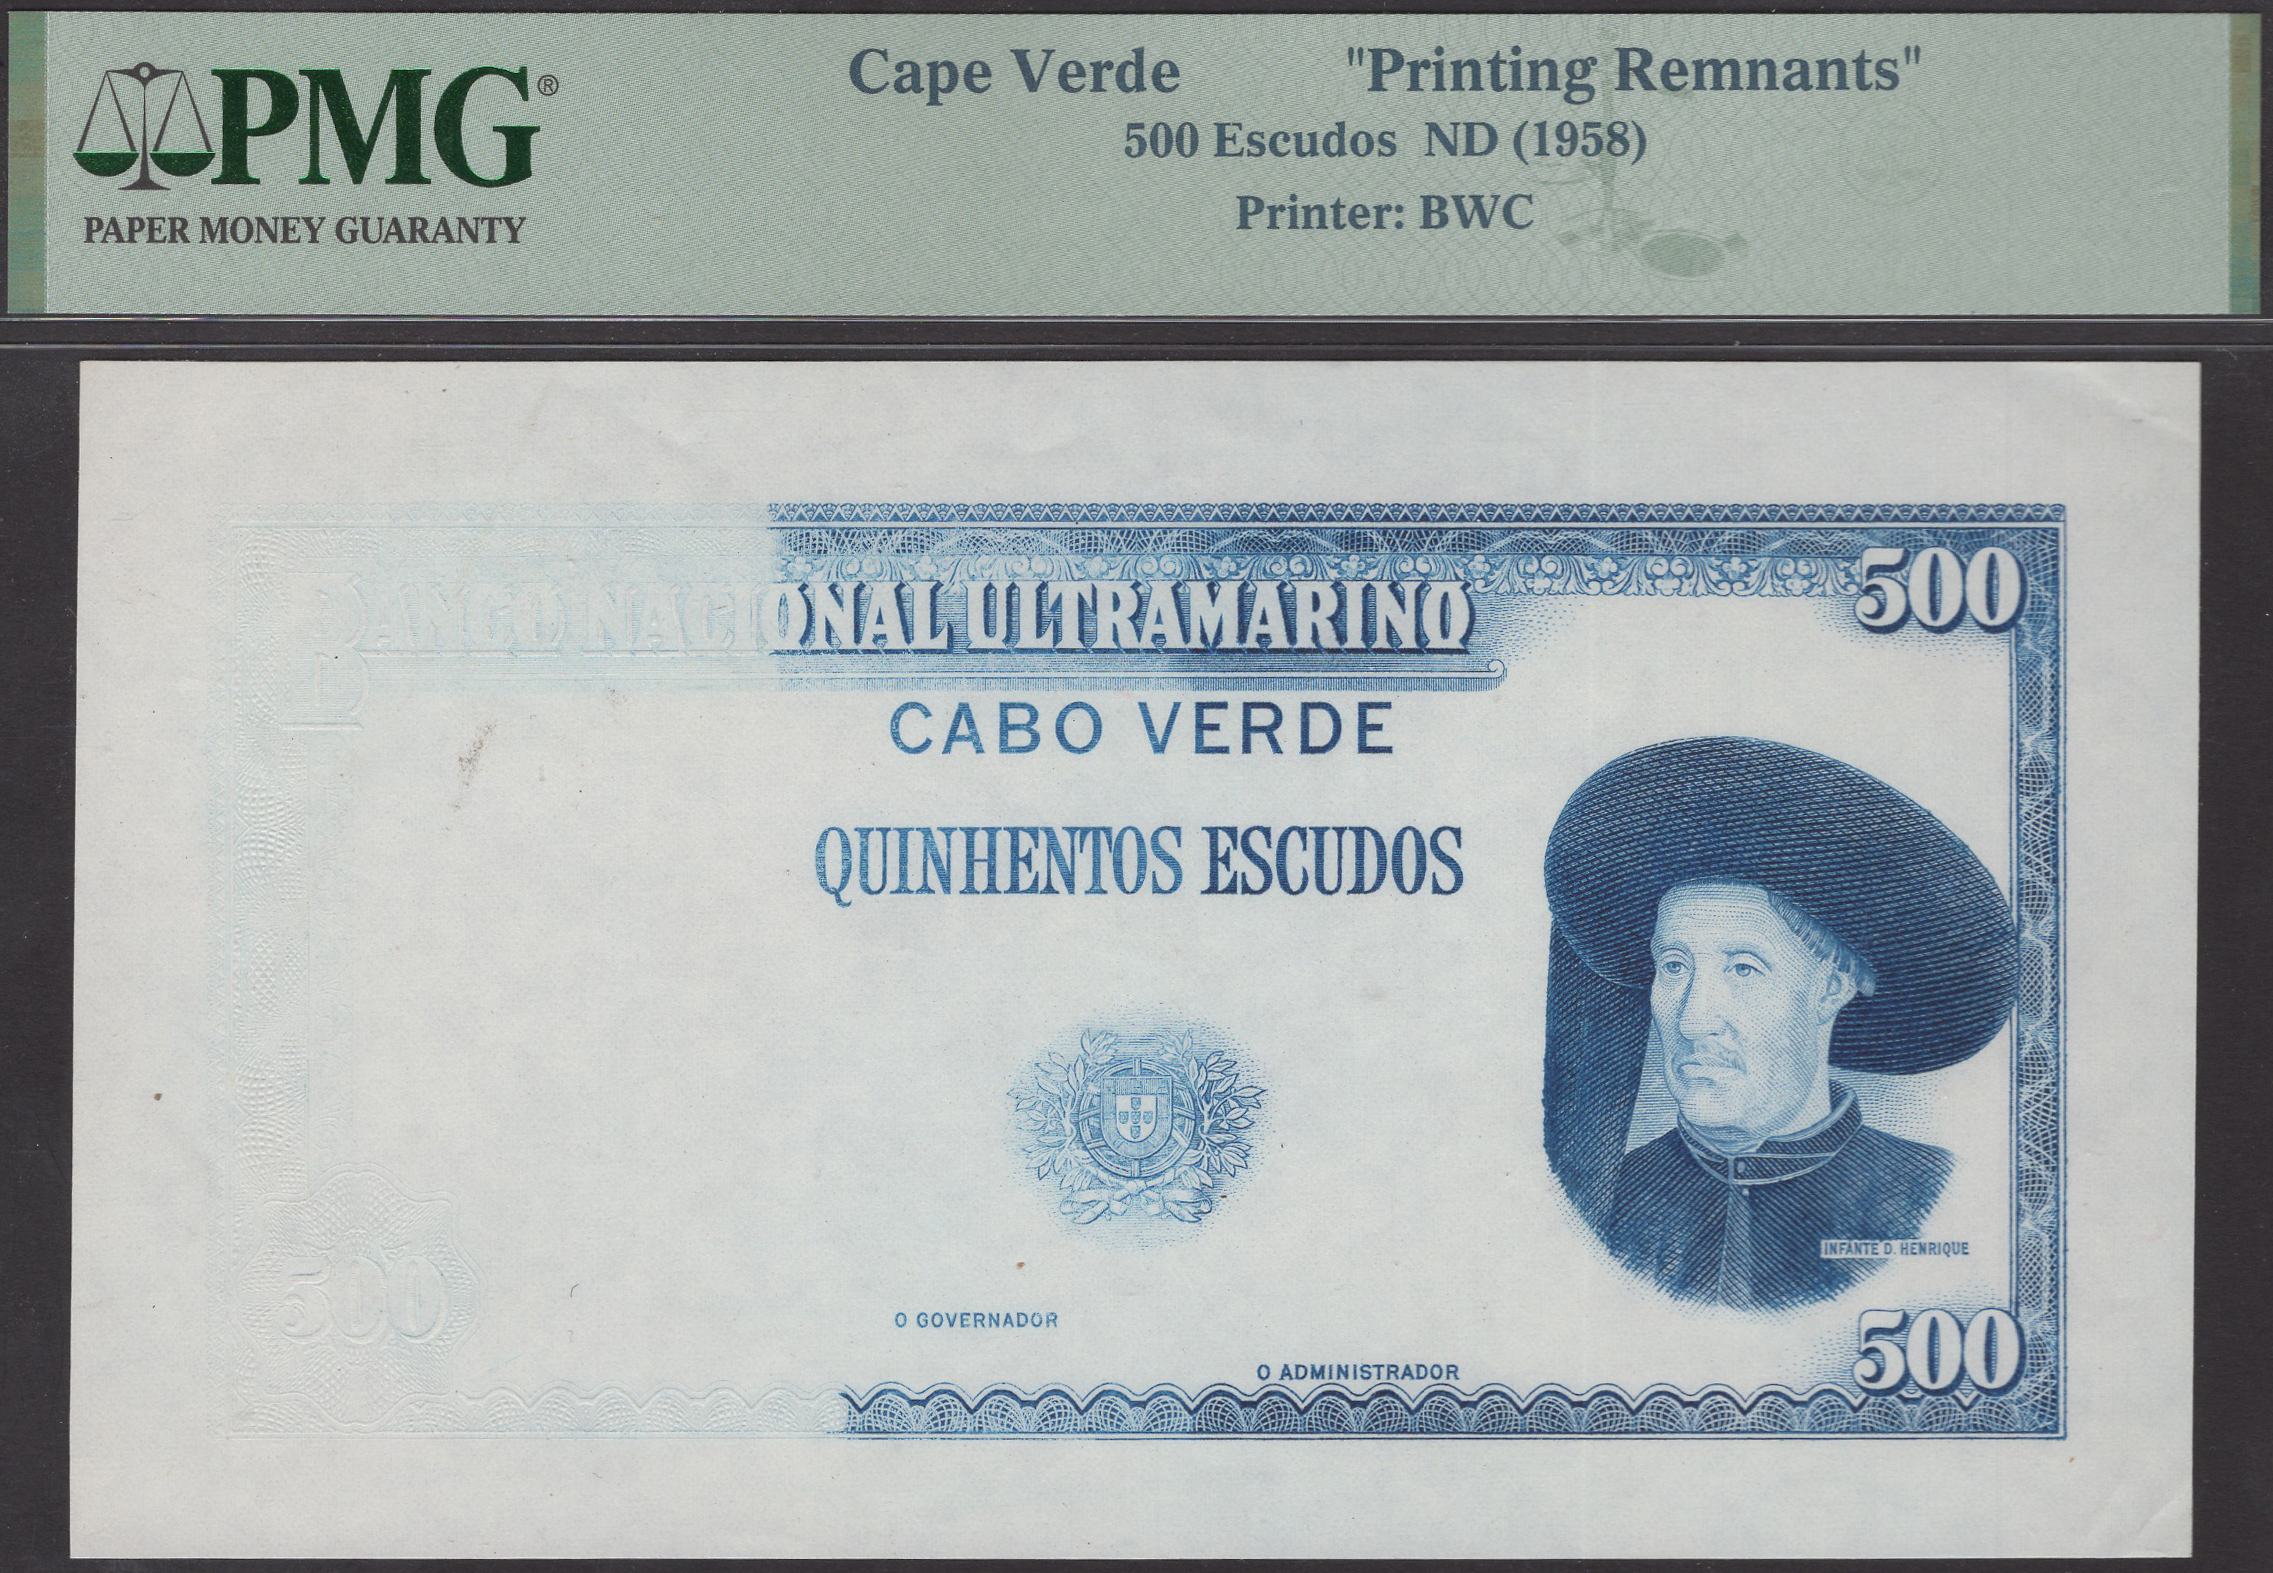 Banco Nacional Ultramarino, Cape Verde, partially printed die proof colour trial for 500...